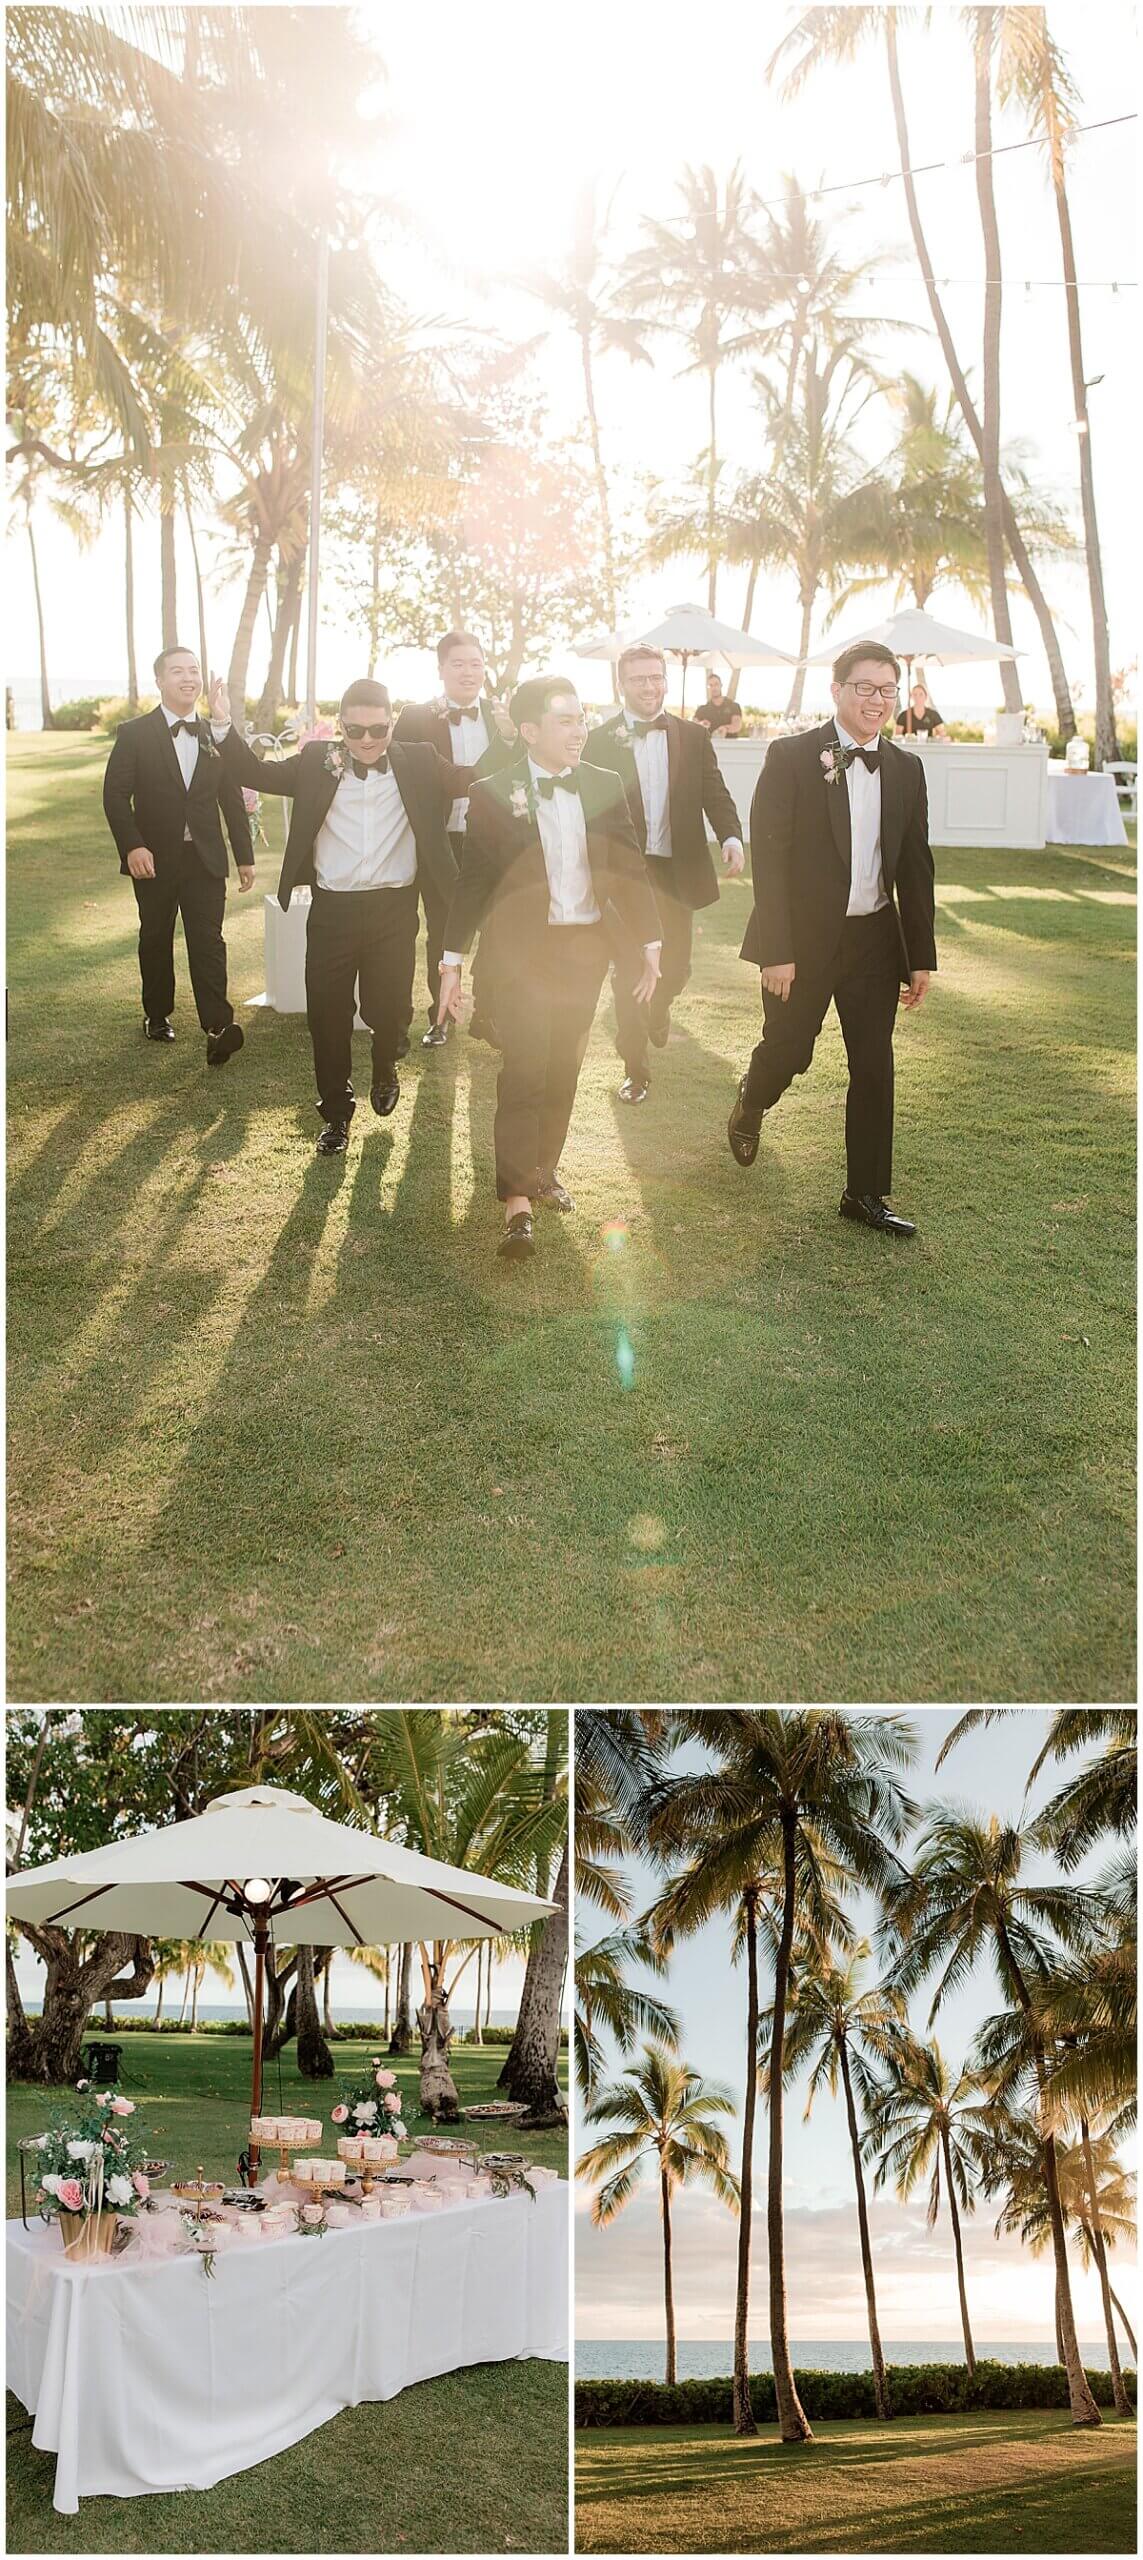 groomsmen walk into reception at sunset with groom by oahu wedding photographer 